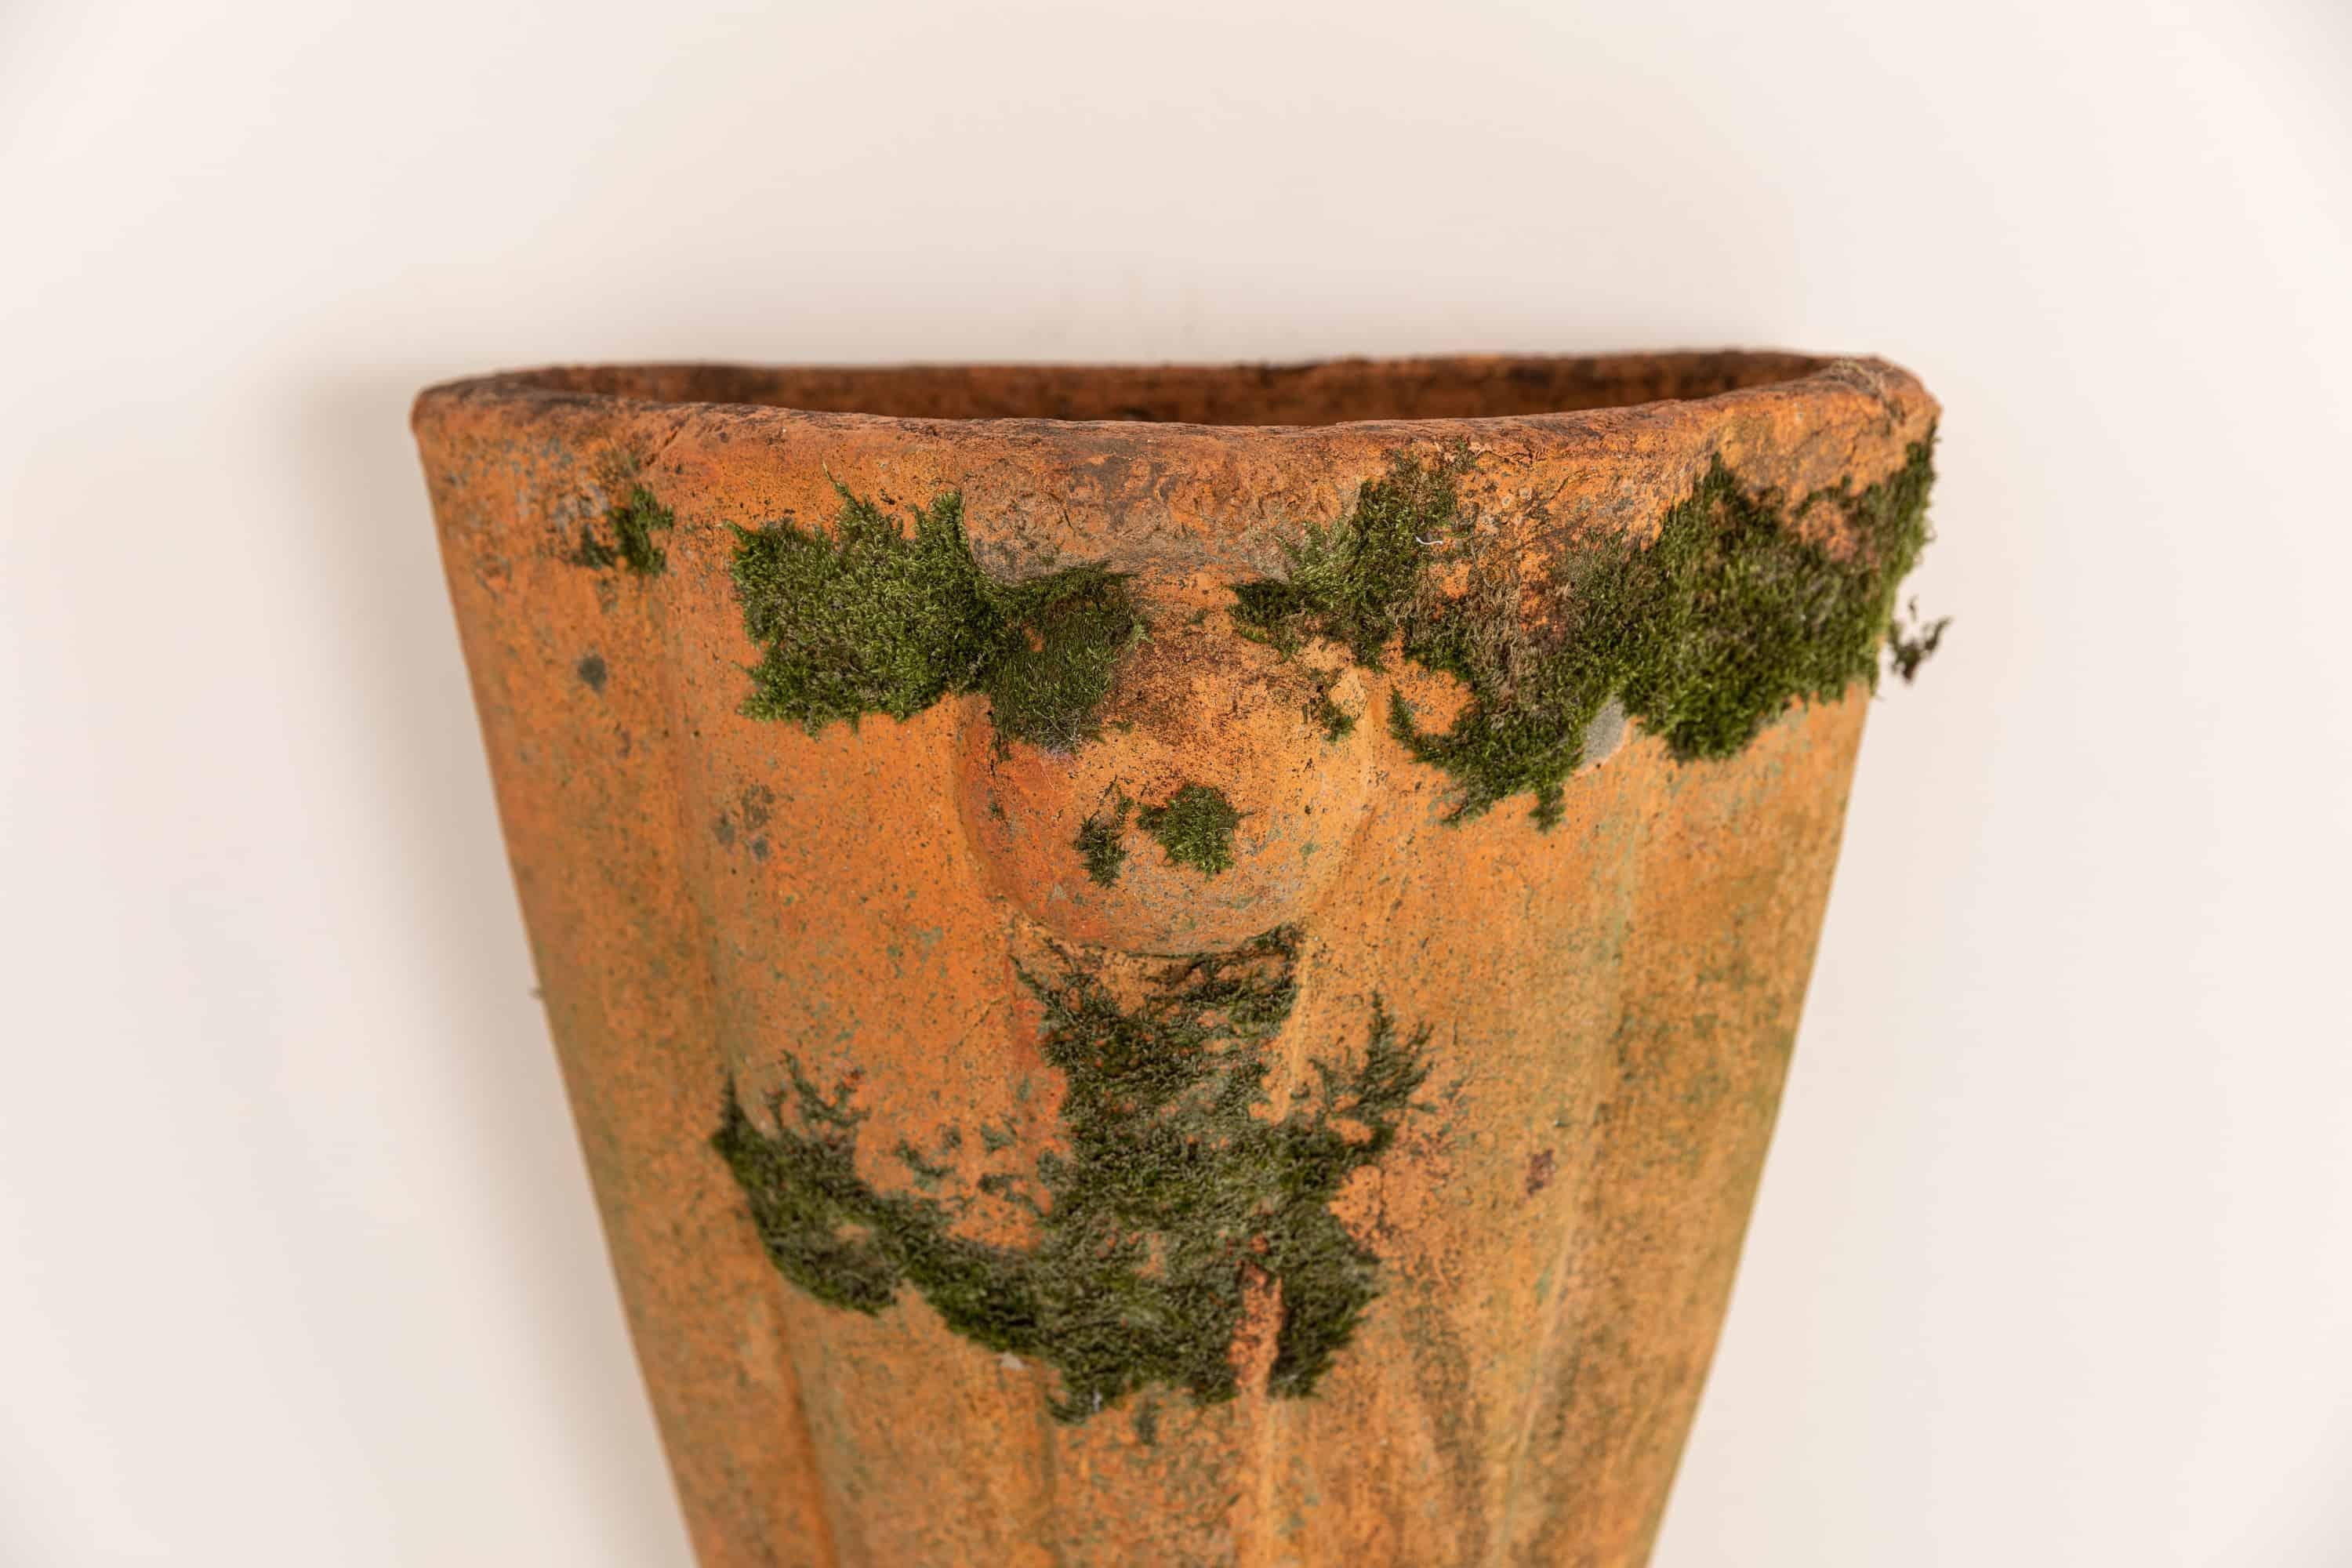 A very attractive concial wall mounted terracotta planter.

Hand made in terracotta which has taken on a beautiful colour over the years, complete with moss. Hole to rear allowing this to be wall hung.